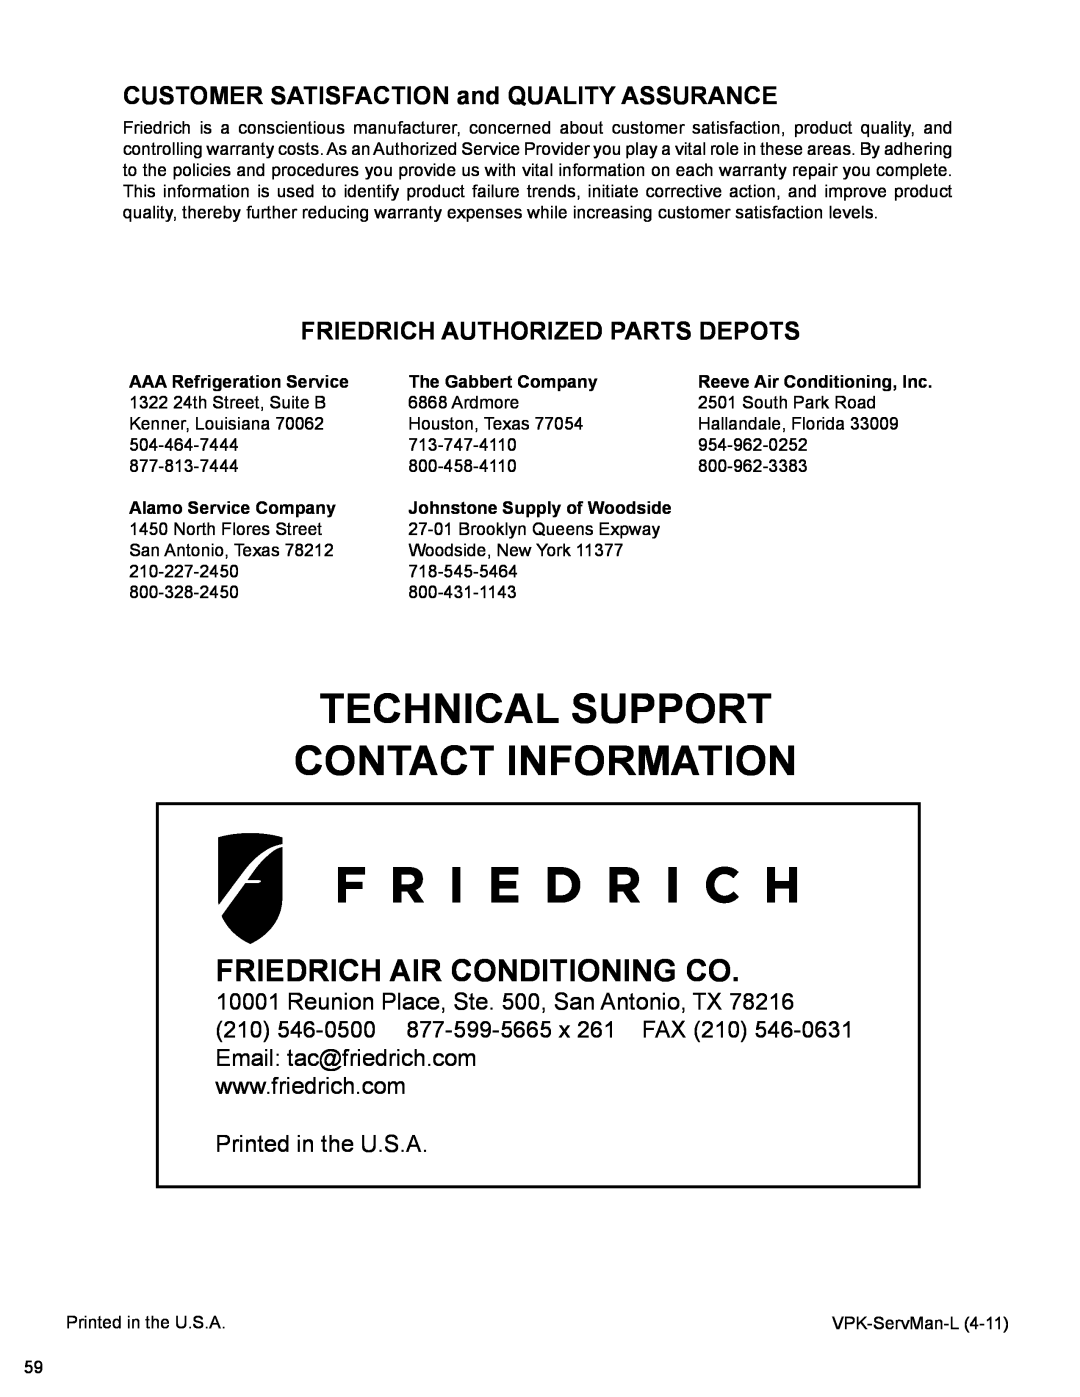 Friedrich R410A manual CUSTOMER SATISFACTION and QUALITY ASSURANCE, Friedrich Authorized Parts Depots 